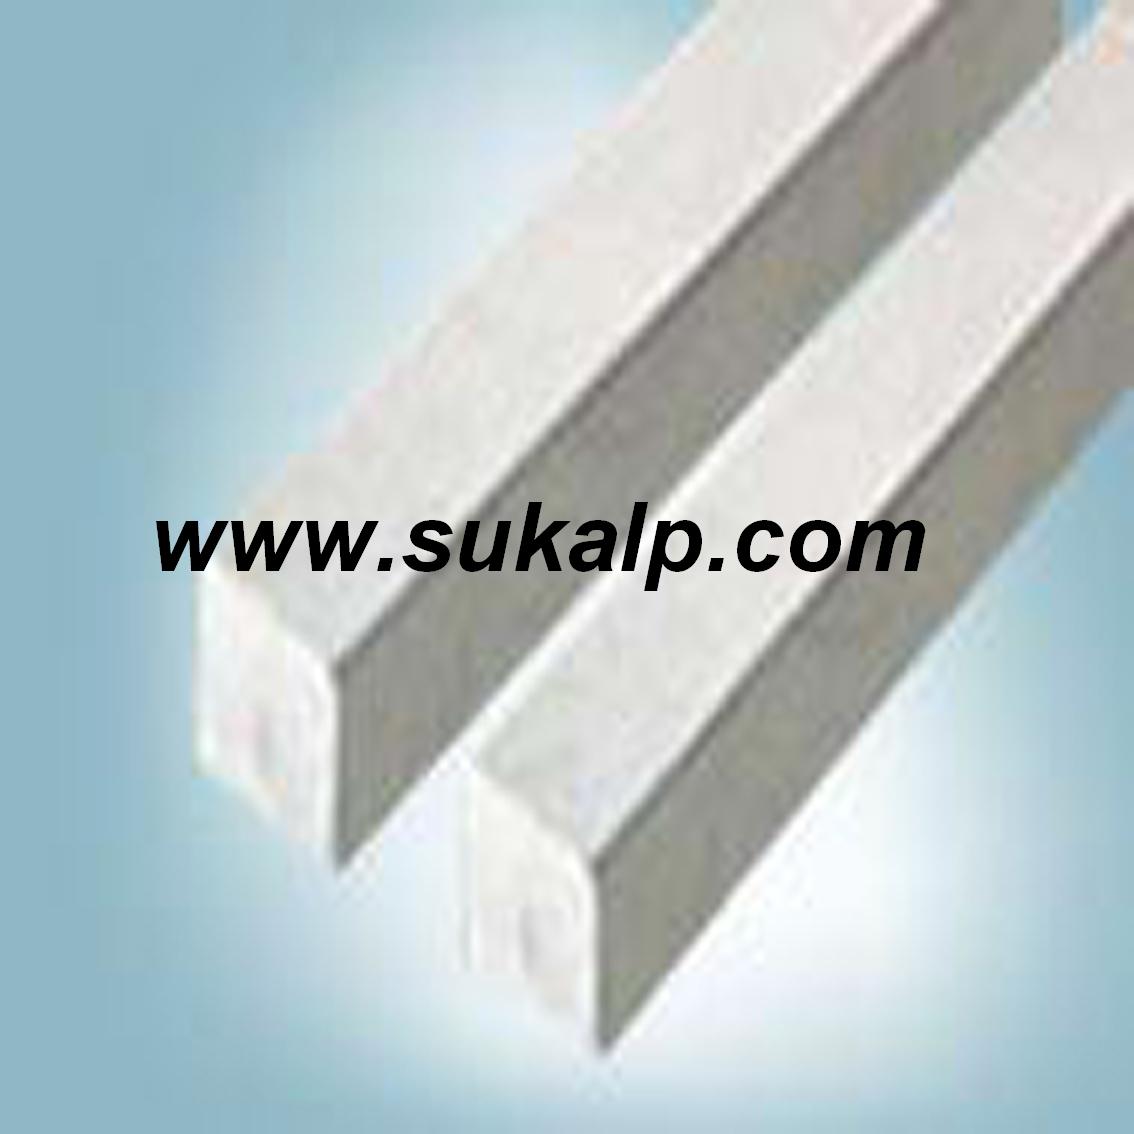 Hot Rolled Square Steel Bars